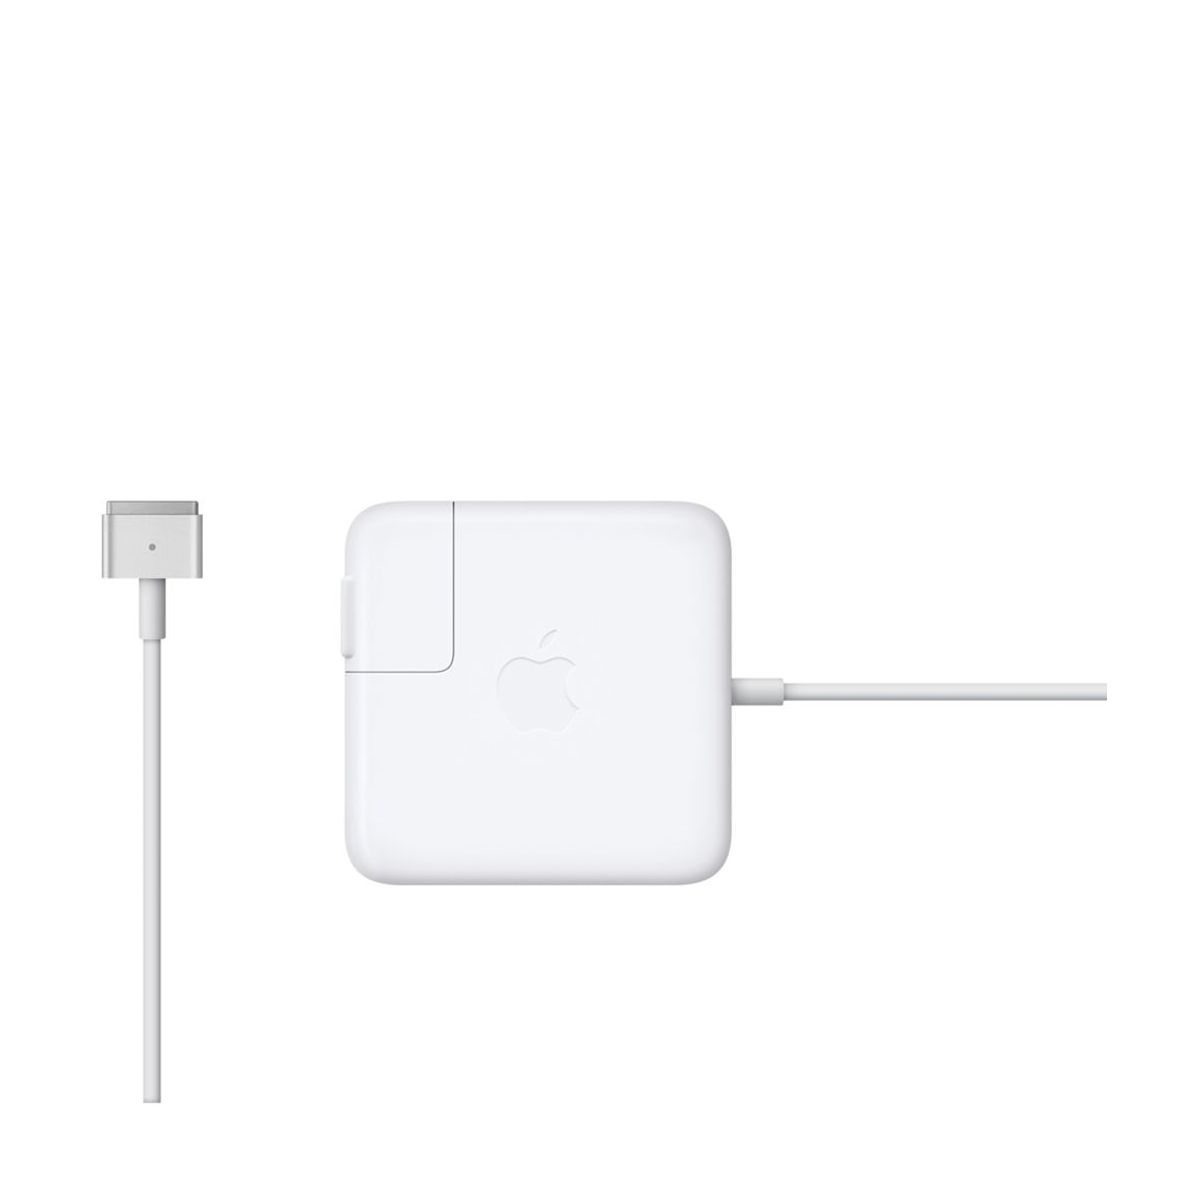 MagSafe 2 Power Adapter - 60W (MacBook Pro 13-inch with Retina display)